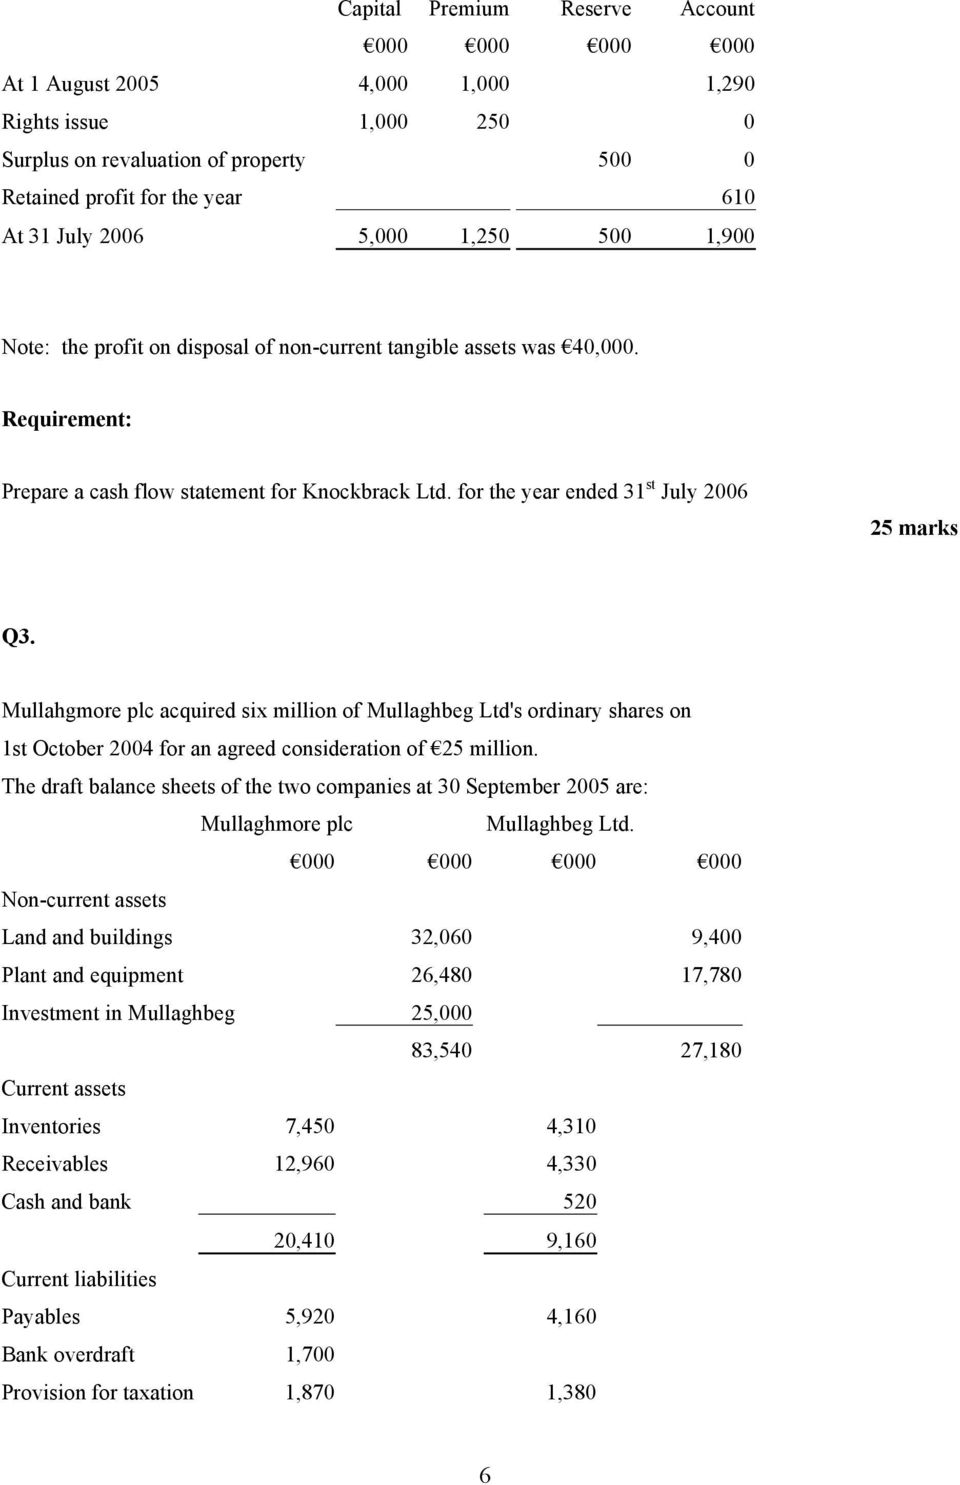 for the year ended 31 st July 2006 25 marks Q3. Mullahgmore plc acquired six million of Mullaghbeg Ltd's ordinary shares on 1st October 2004 for an agreed consideration of 25 million.